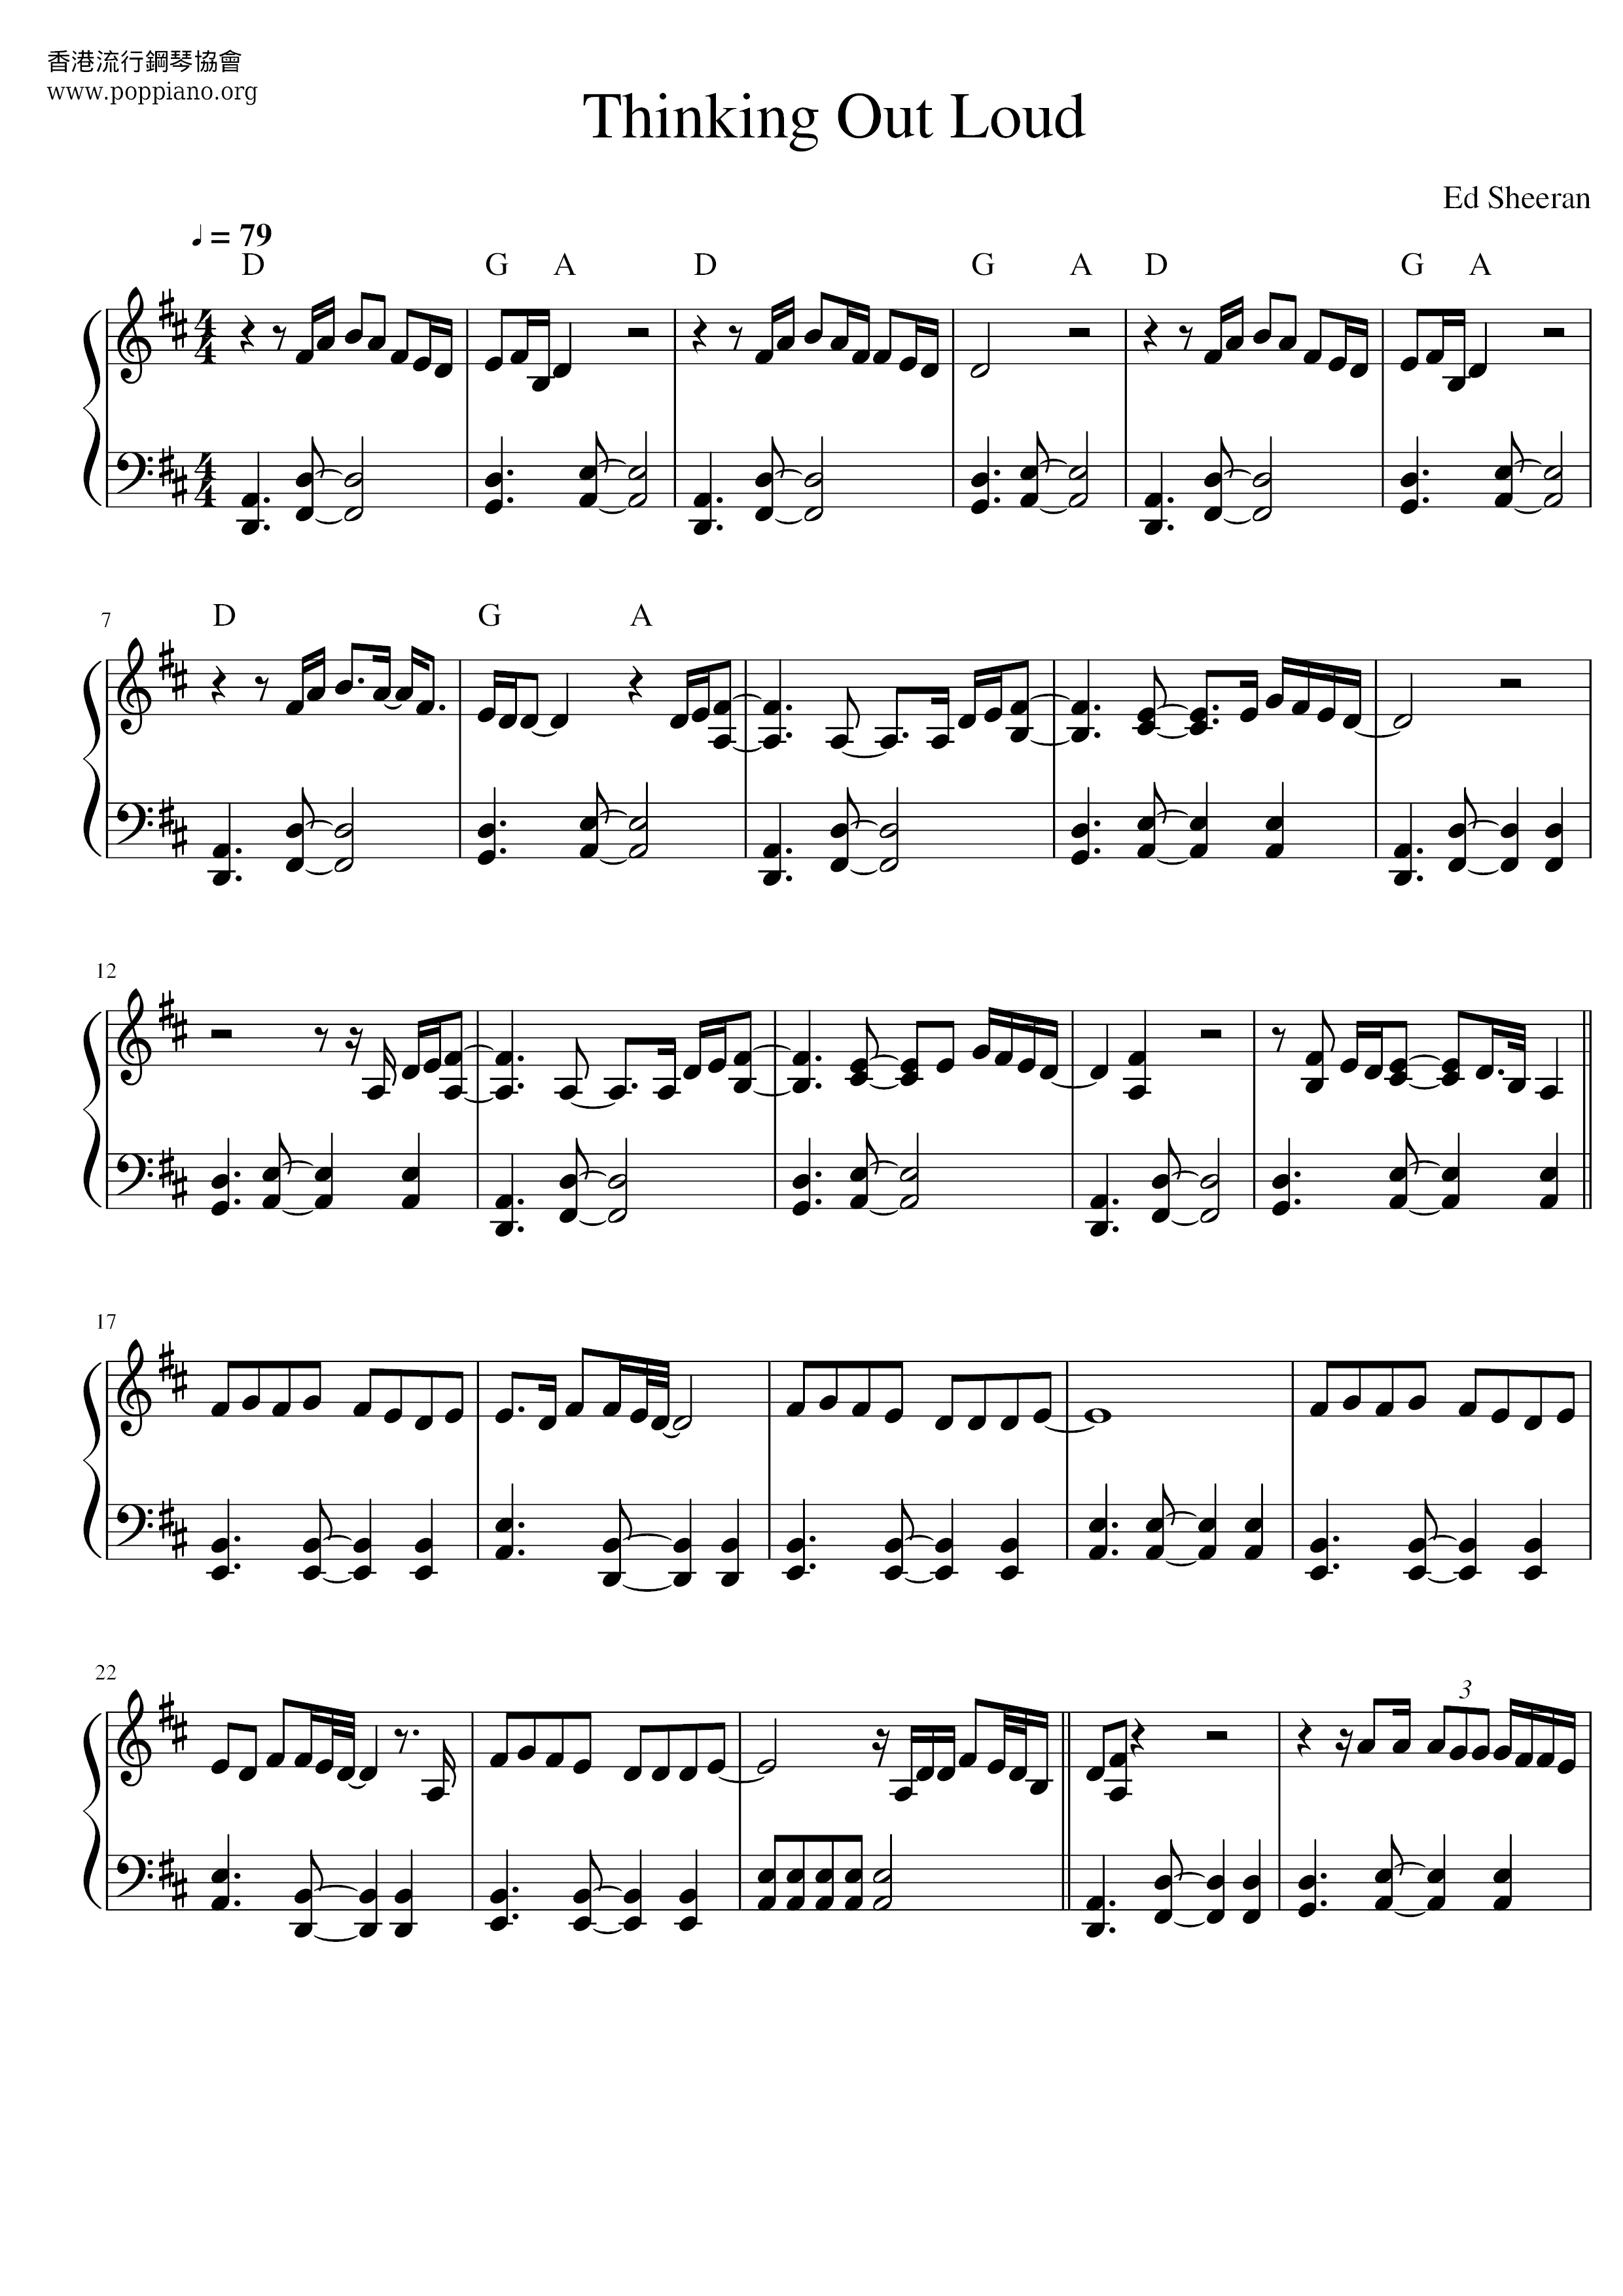 Thinking Out Loud Score